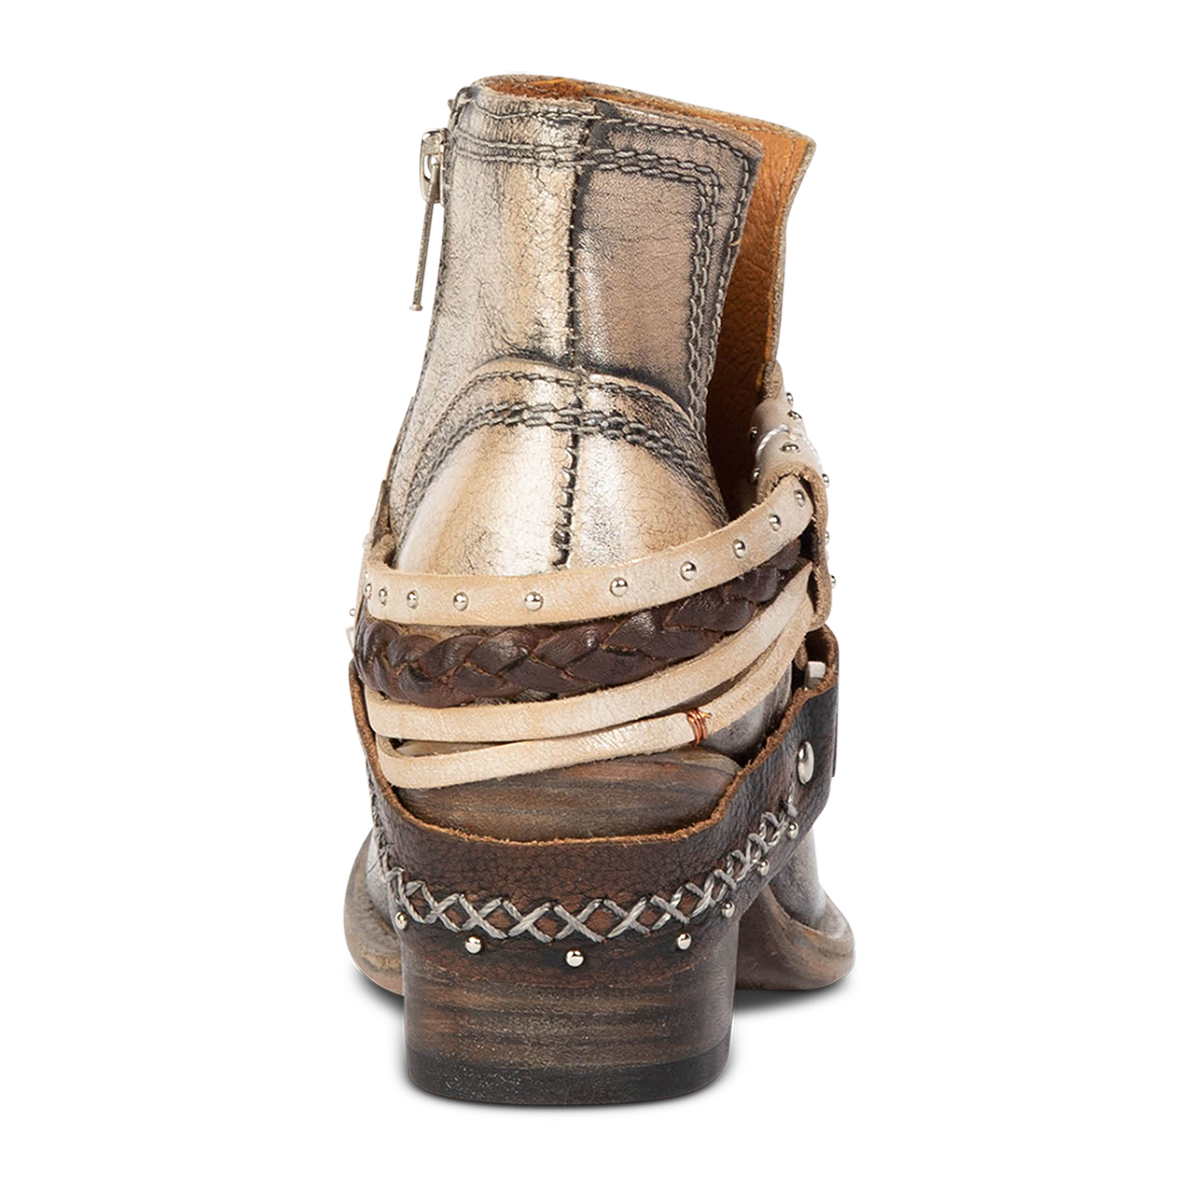 Back view showing wood heel with embellished decorative ankle belts on FREEBIRD women's Sabelle pewter bootie